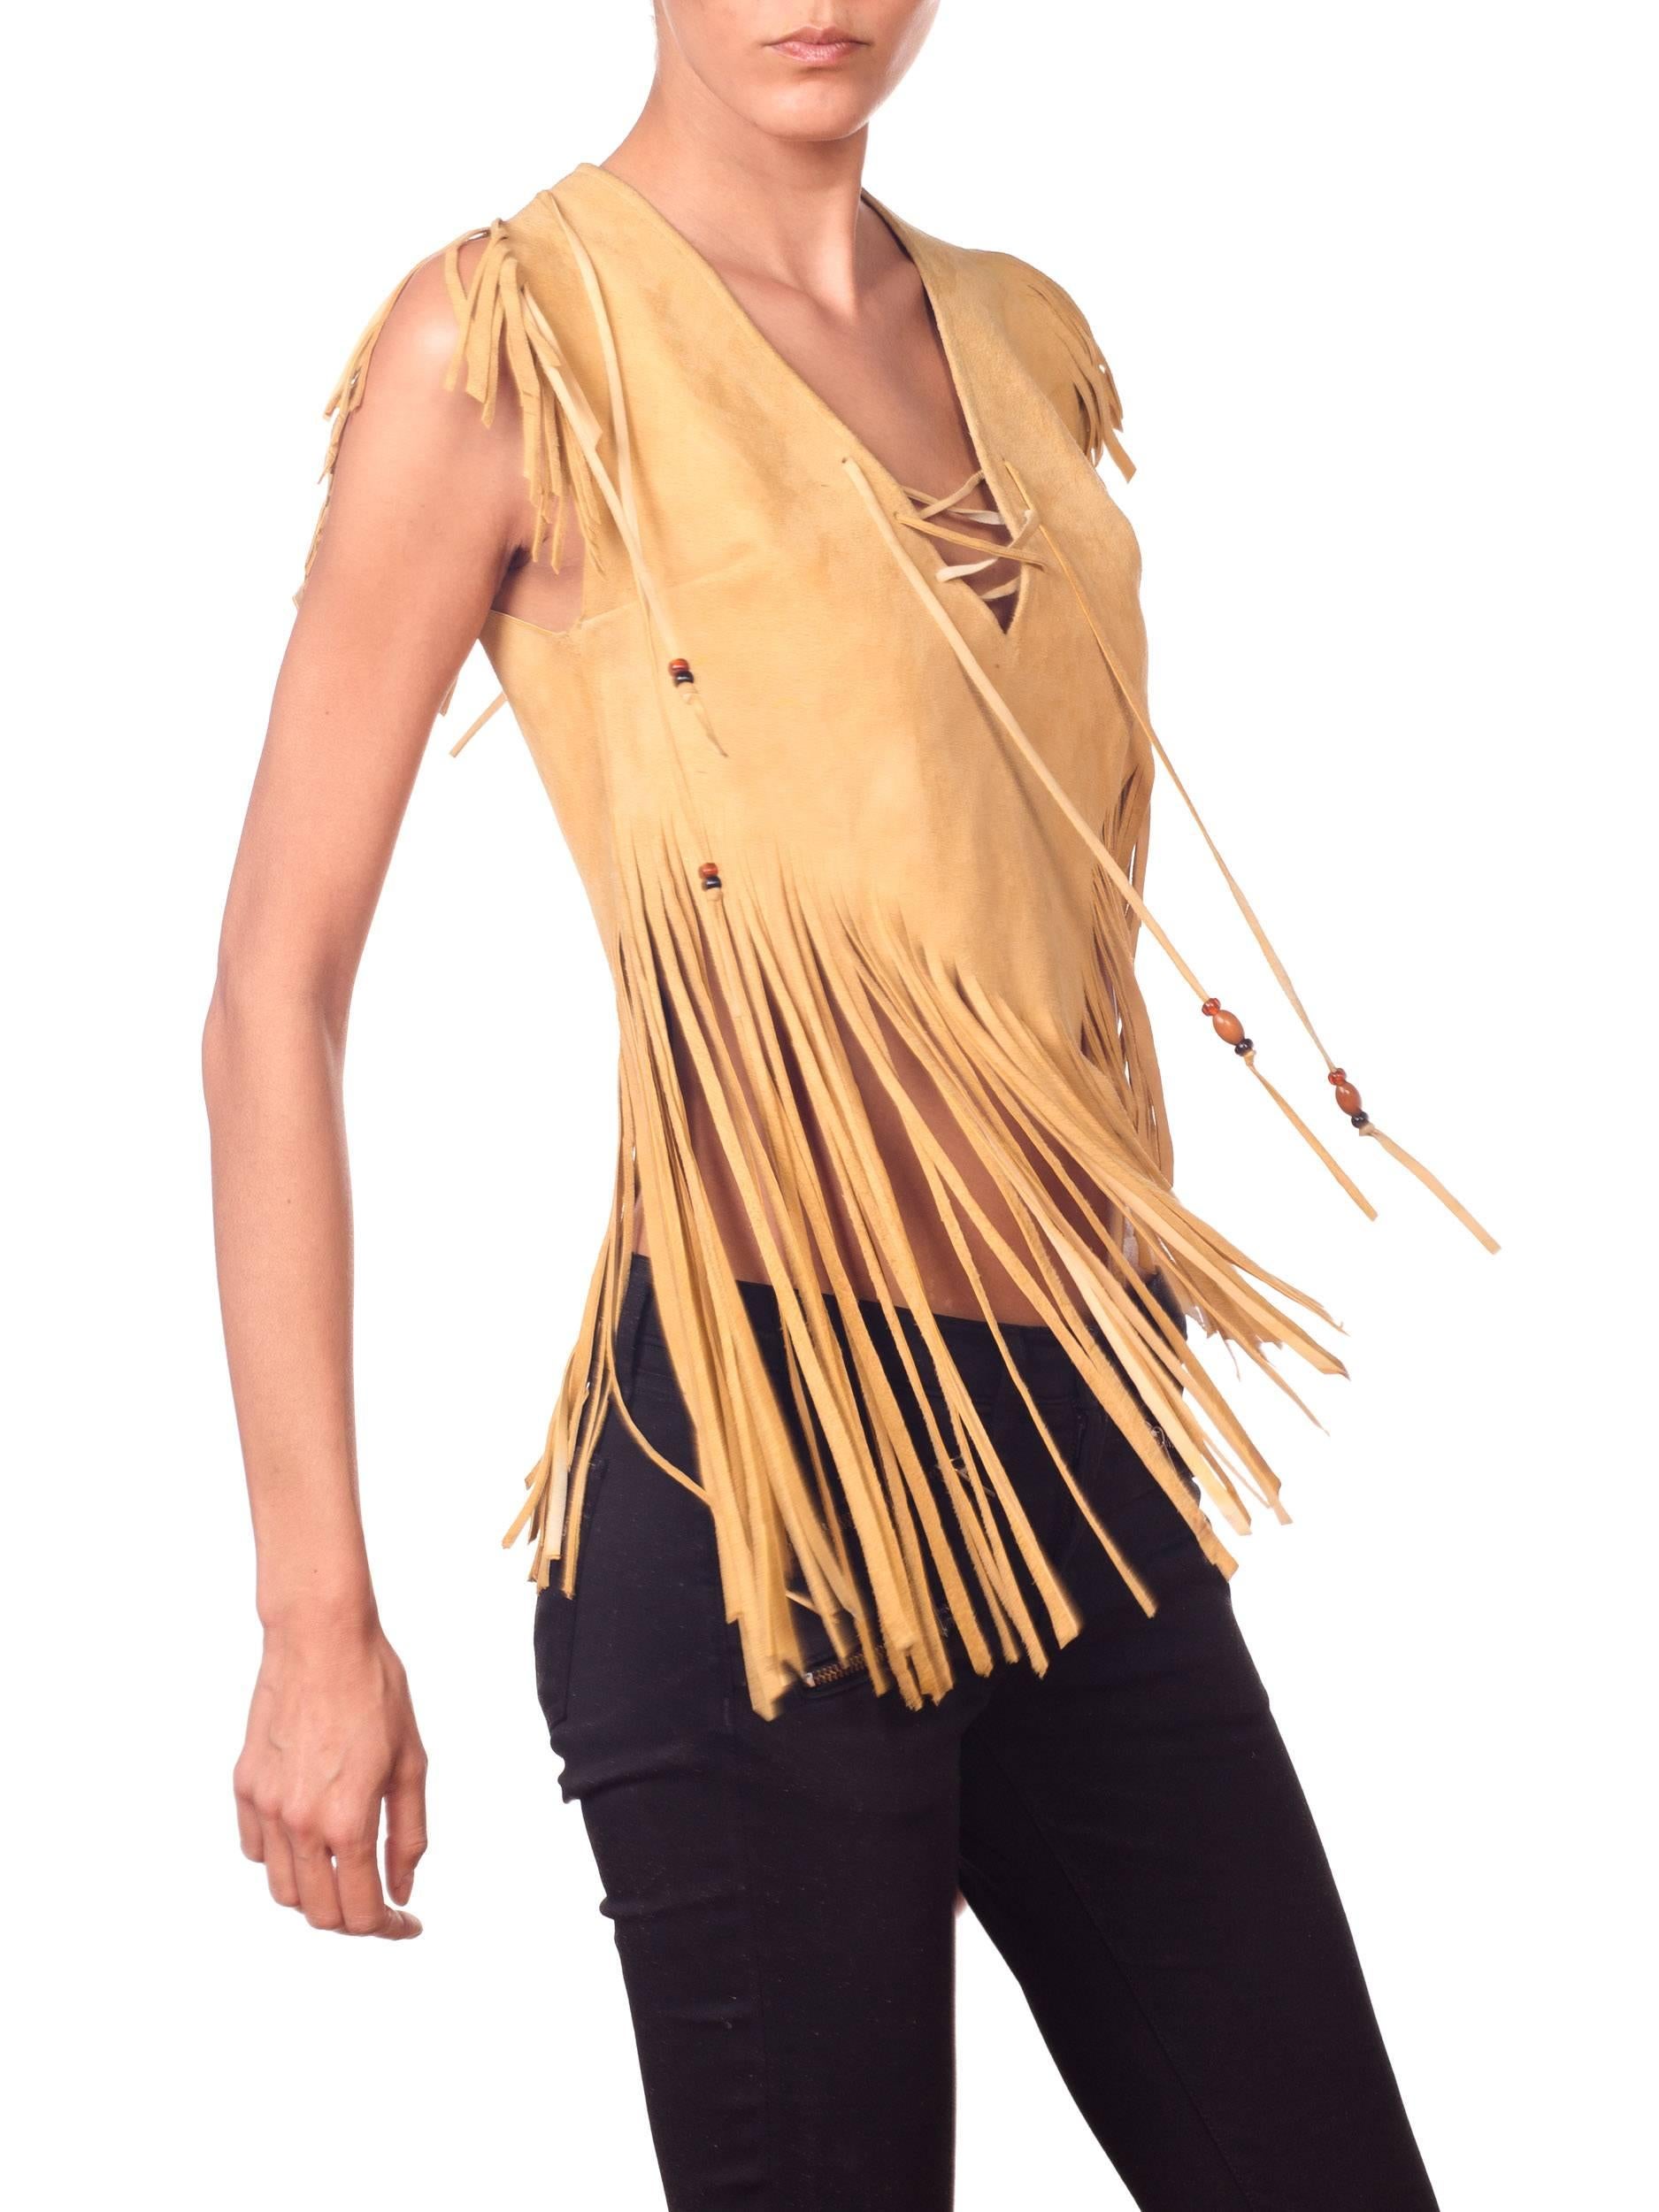 70s Leather Fringe Crop Top with Beads 1